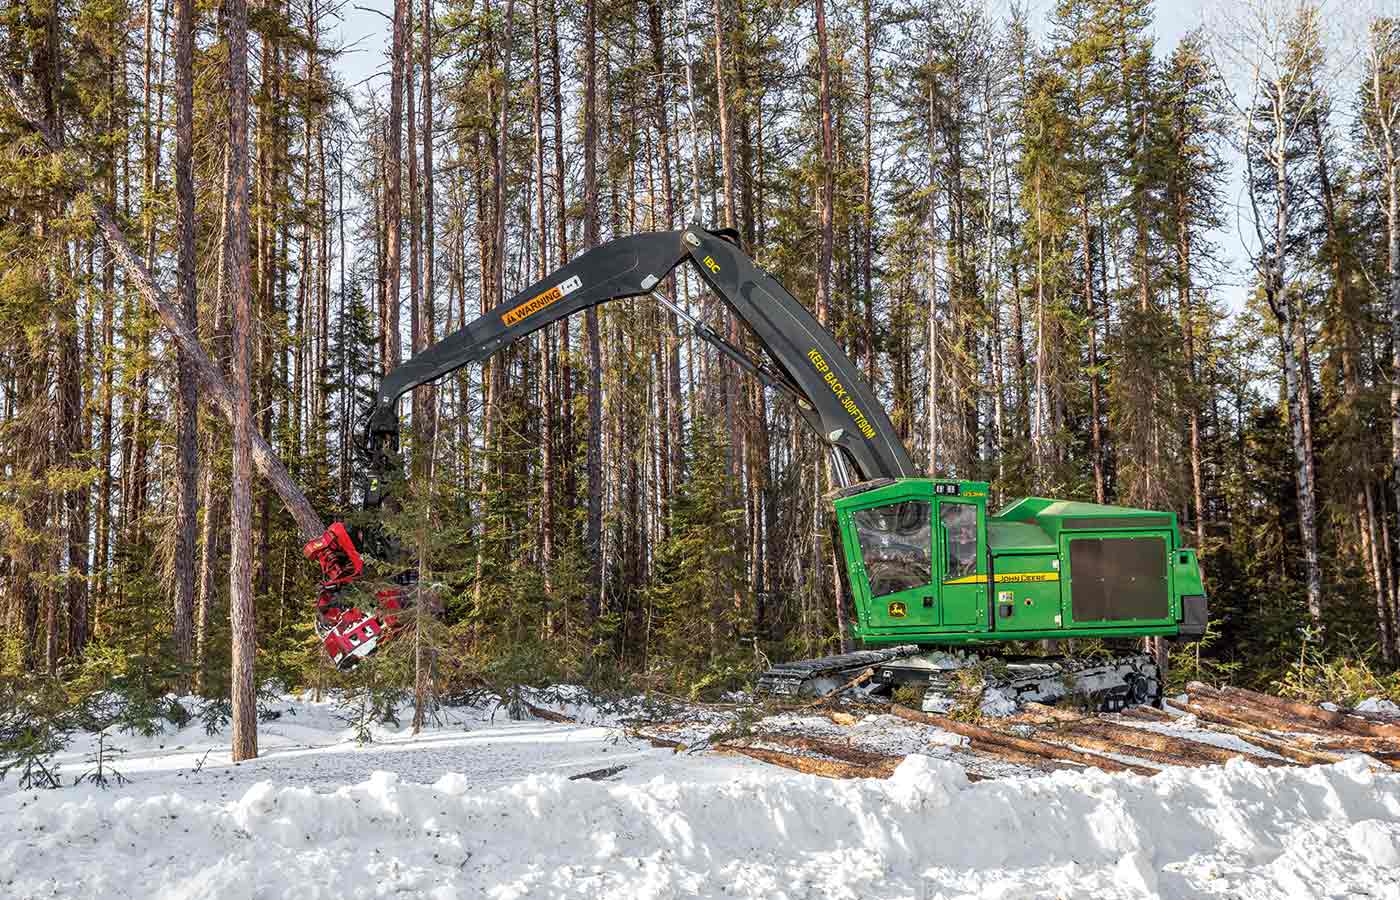 The development of this model is the result of worldwide collaboration between John Deere Forestry teams